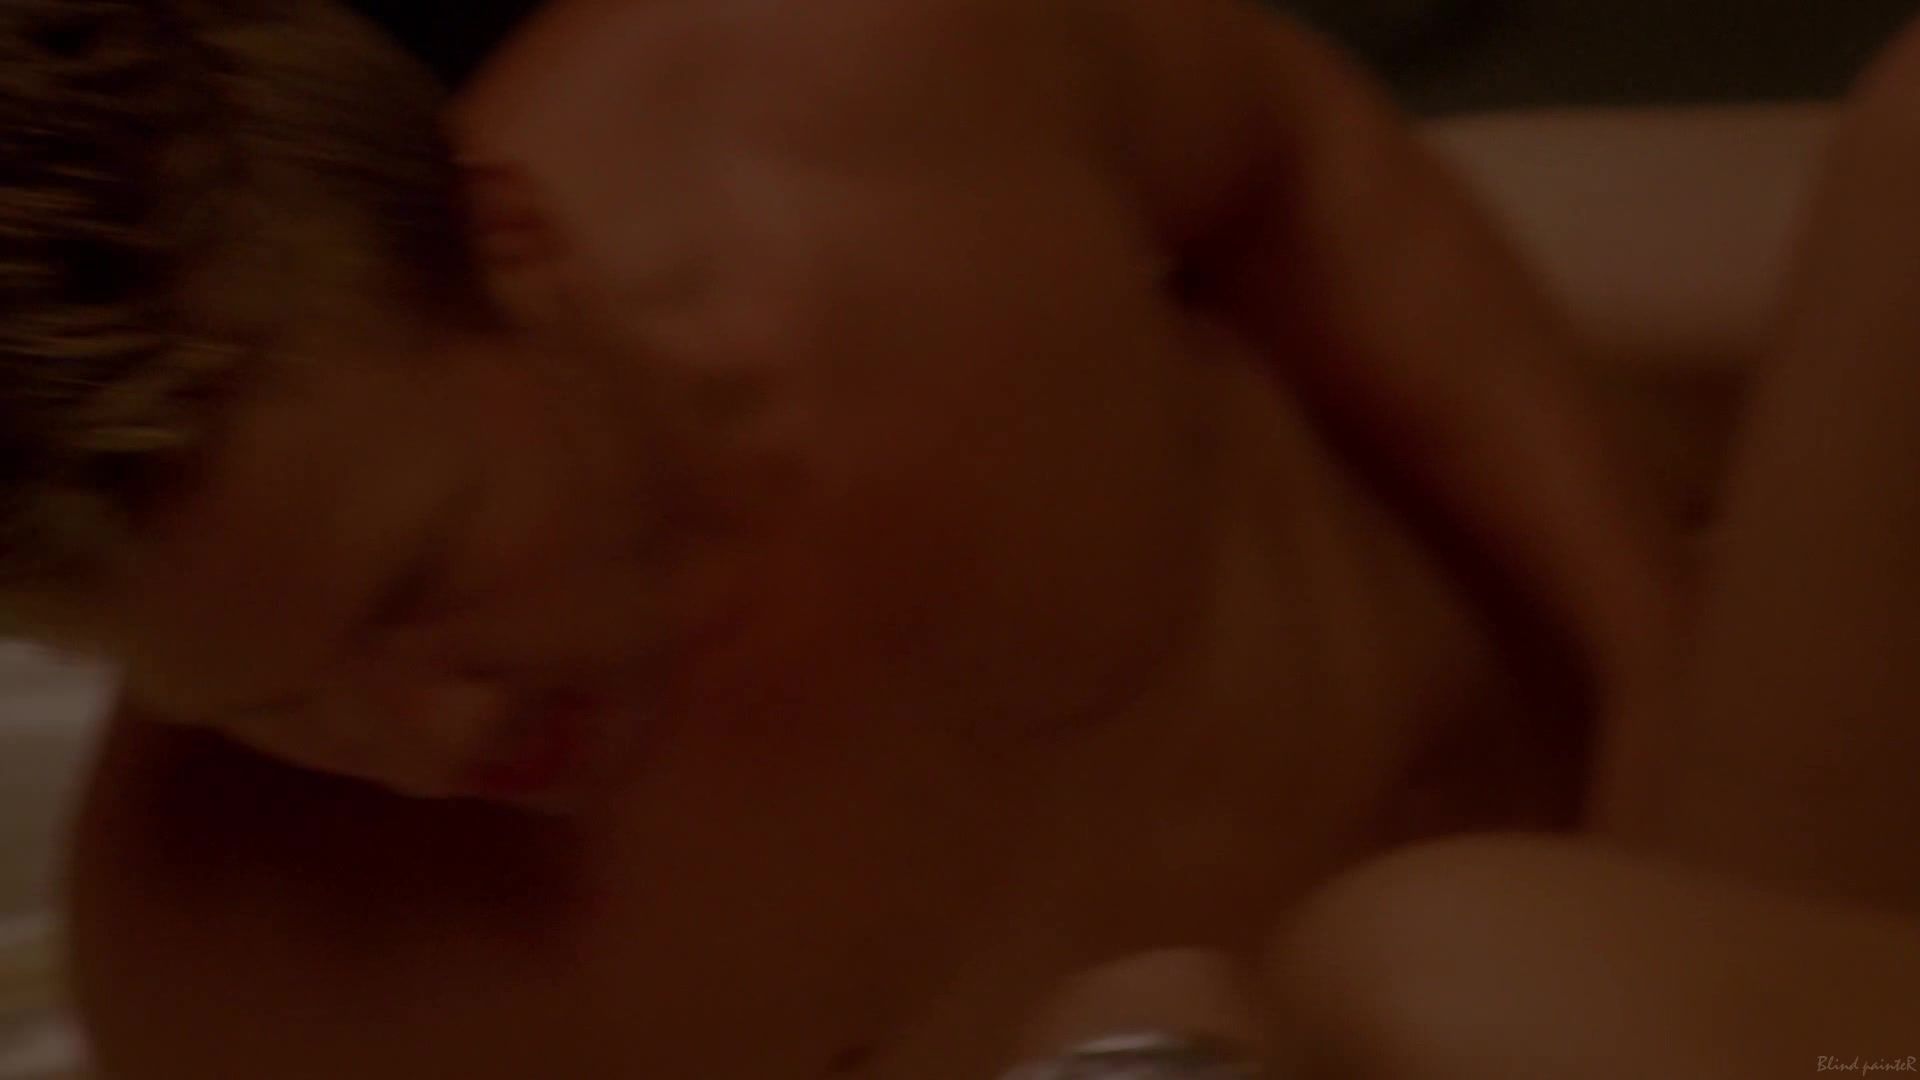 Bound Sex video Lady Gaga & Chasty Ballesteros nude - American Horror Story S05E01 (2015) Highschool - 1